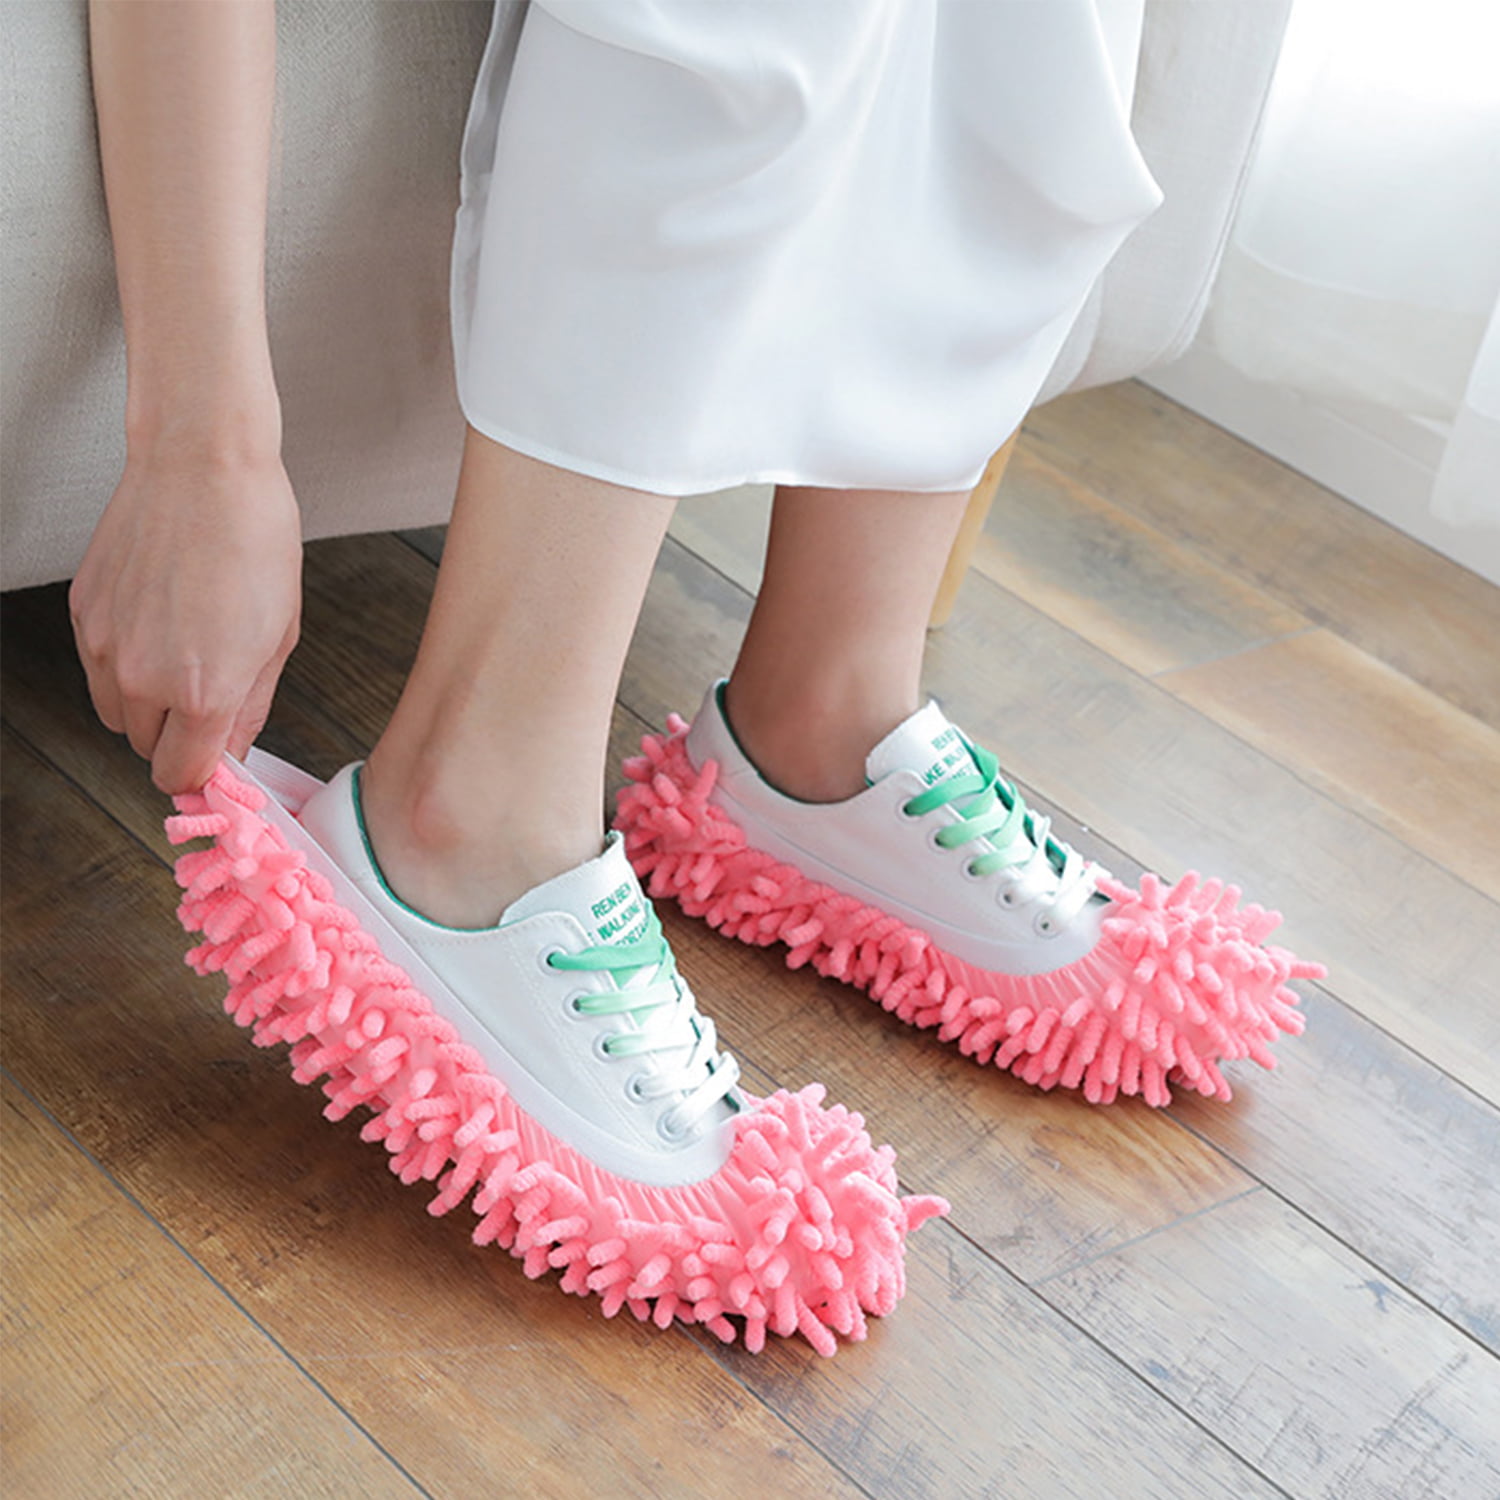 foot mop slippers